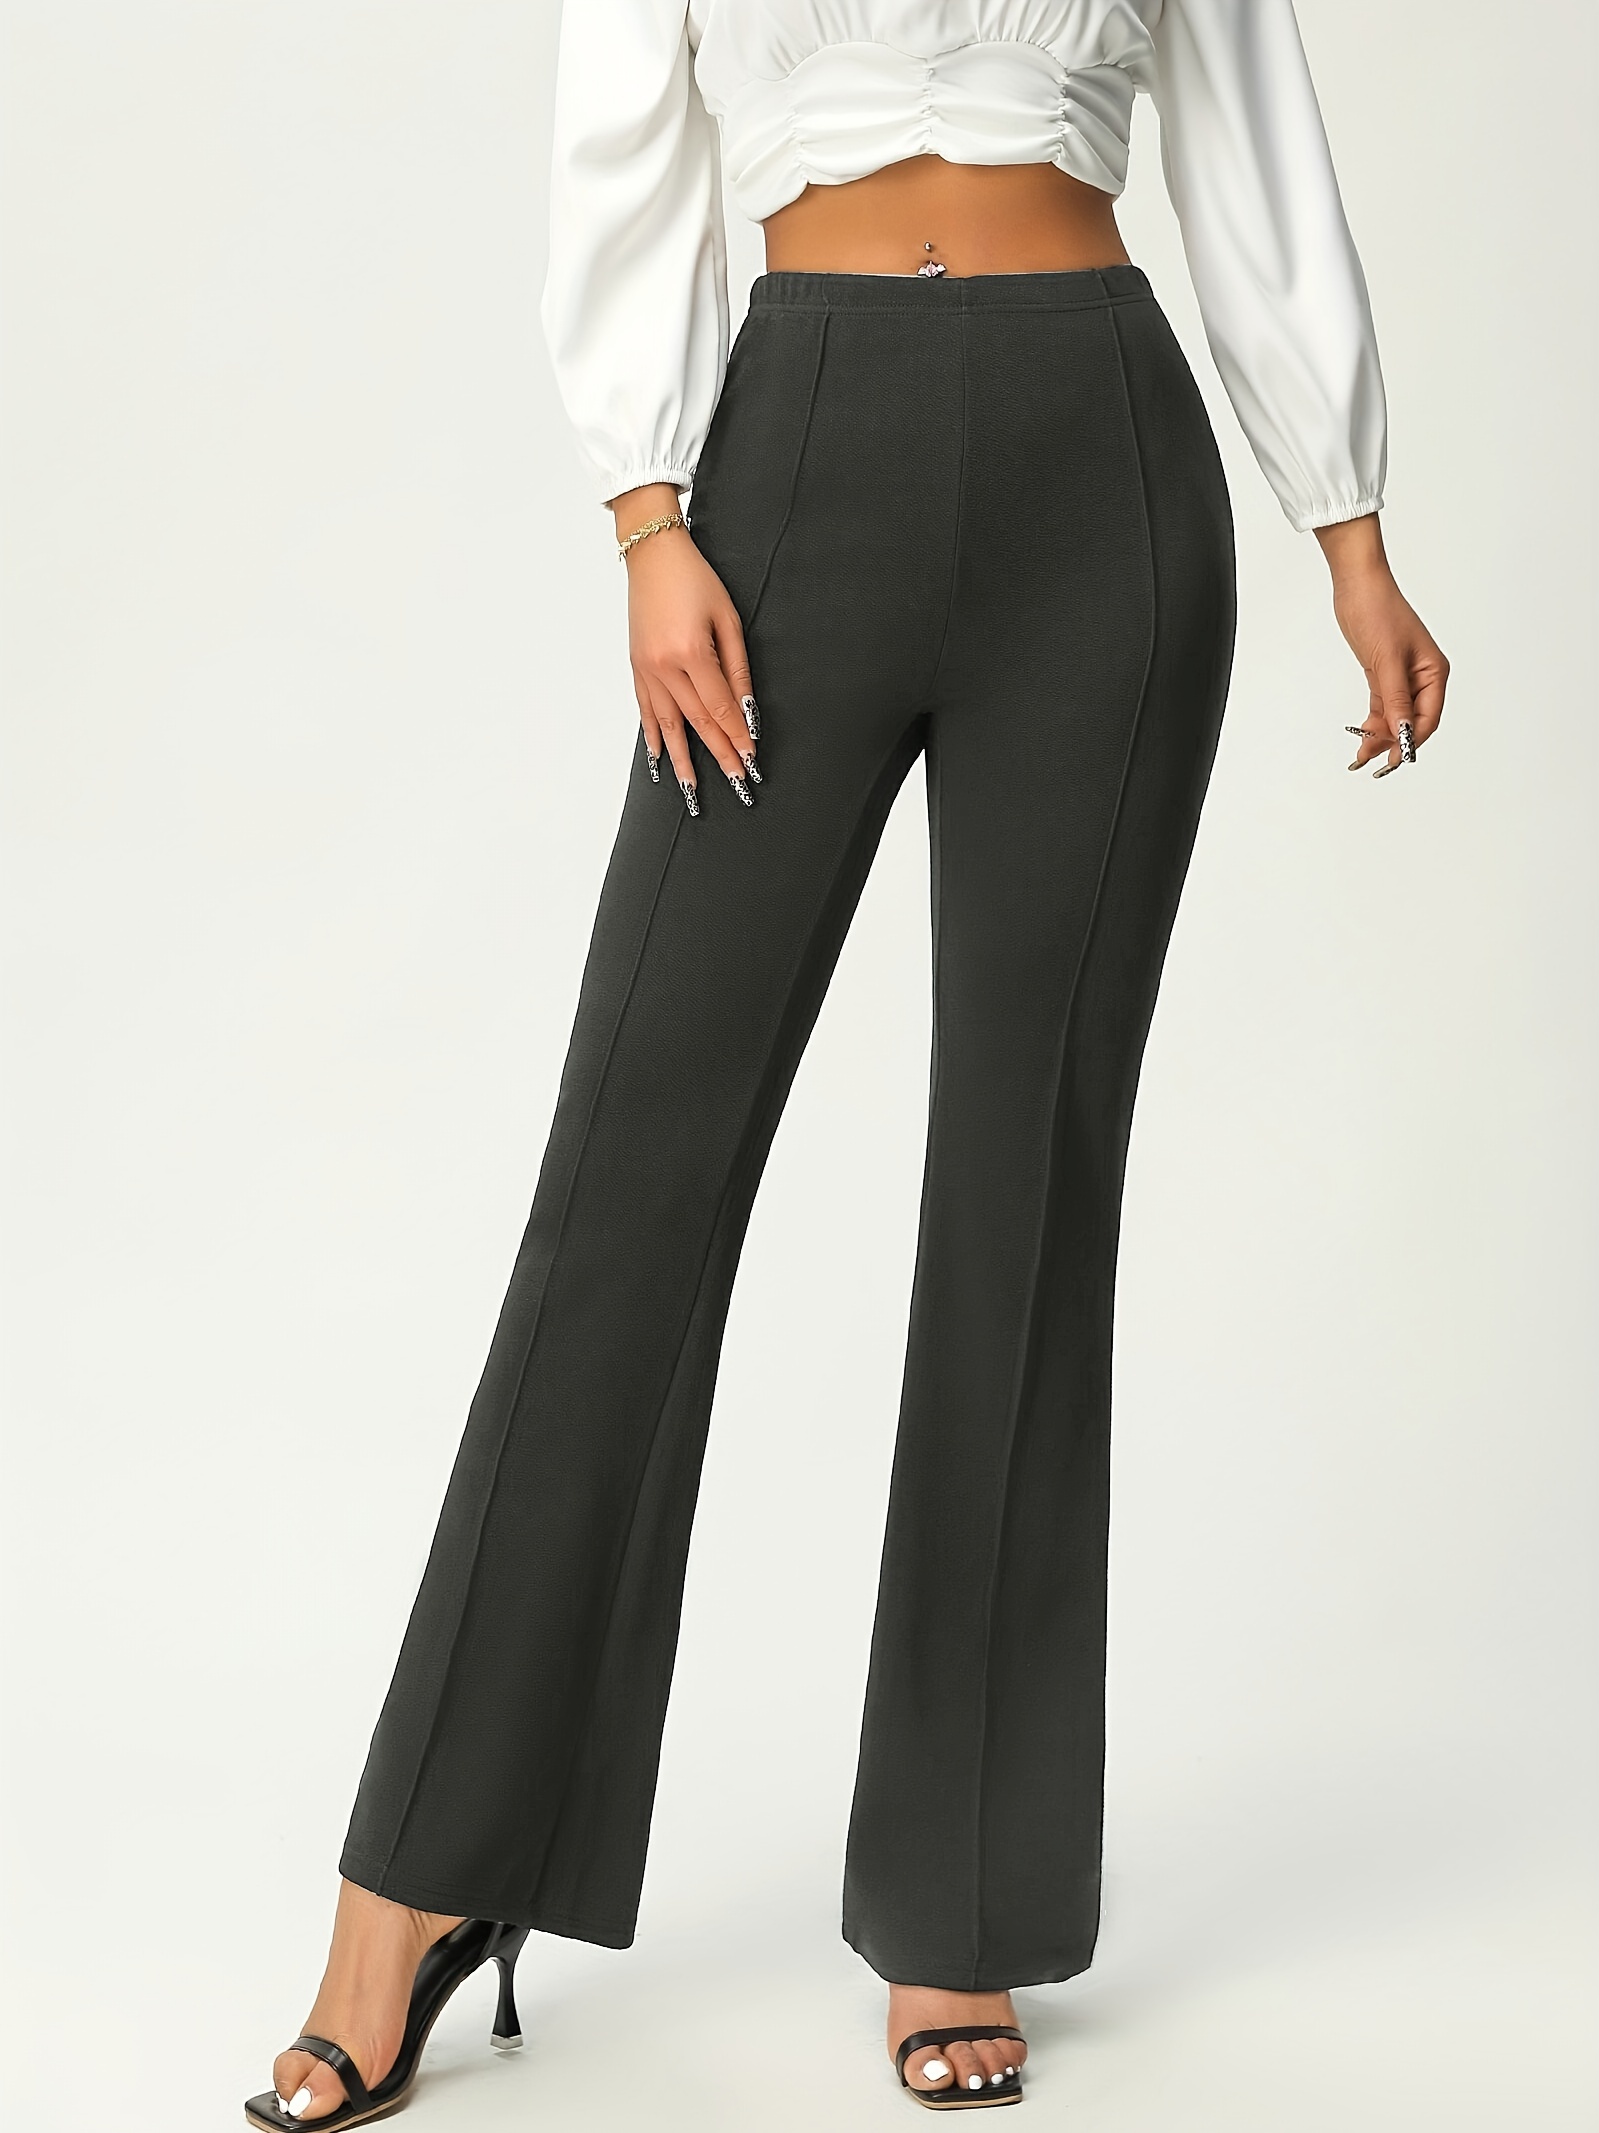 Work Pants For Women, Business Pants